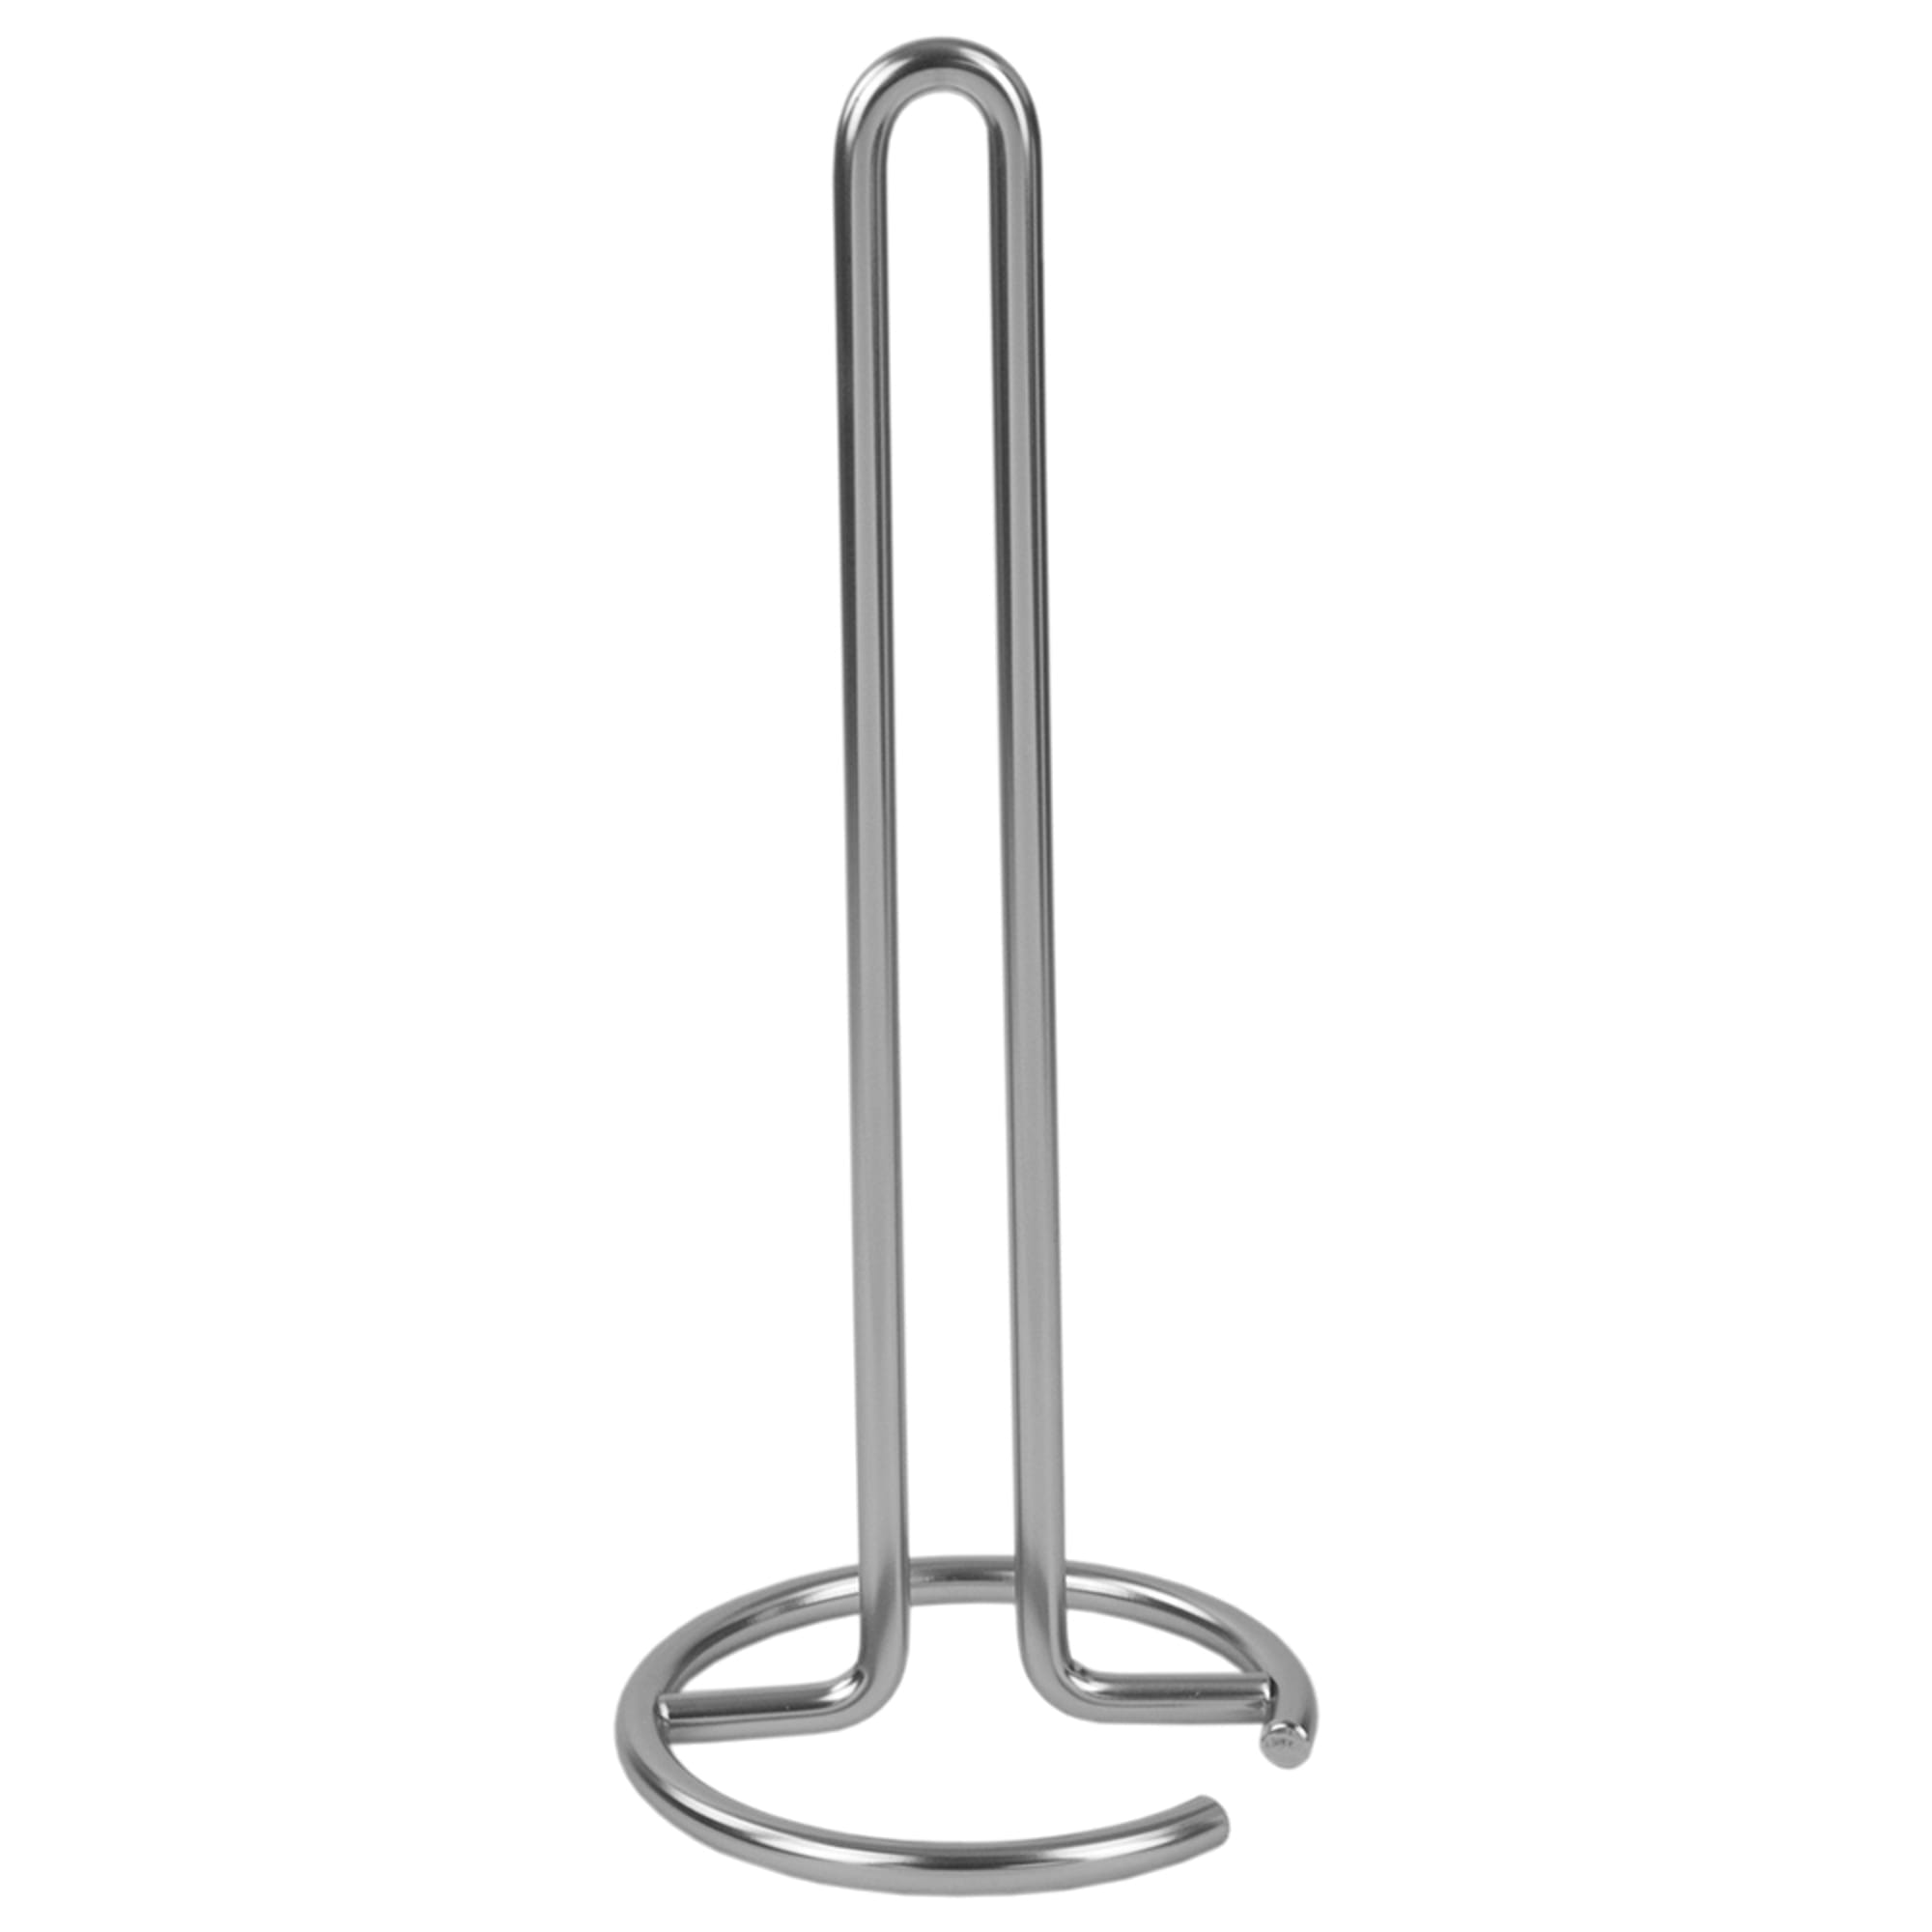 Home Basics Simplicity Collection Paper Towel Holder, Satin Chrome $5.00 EACH, CASE PACK OF 12